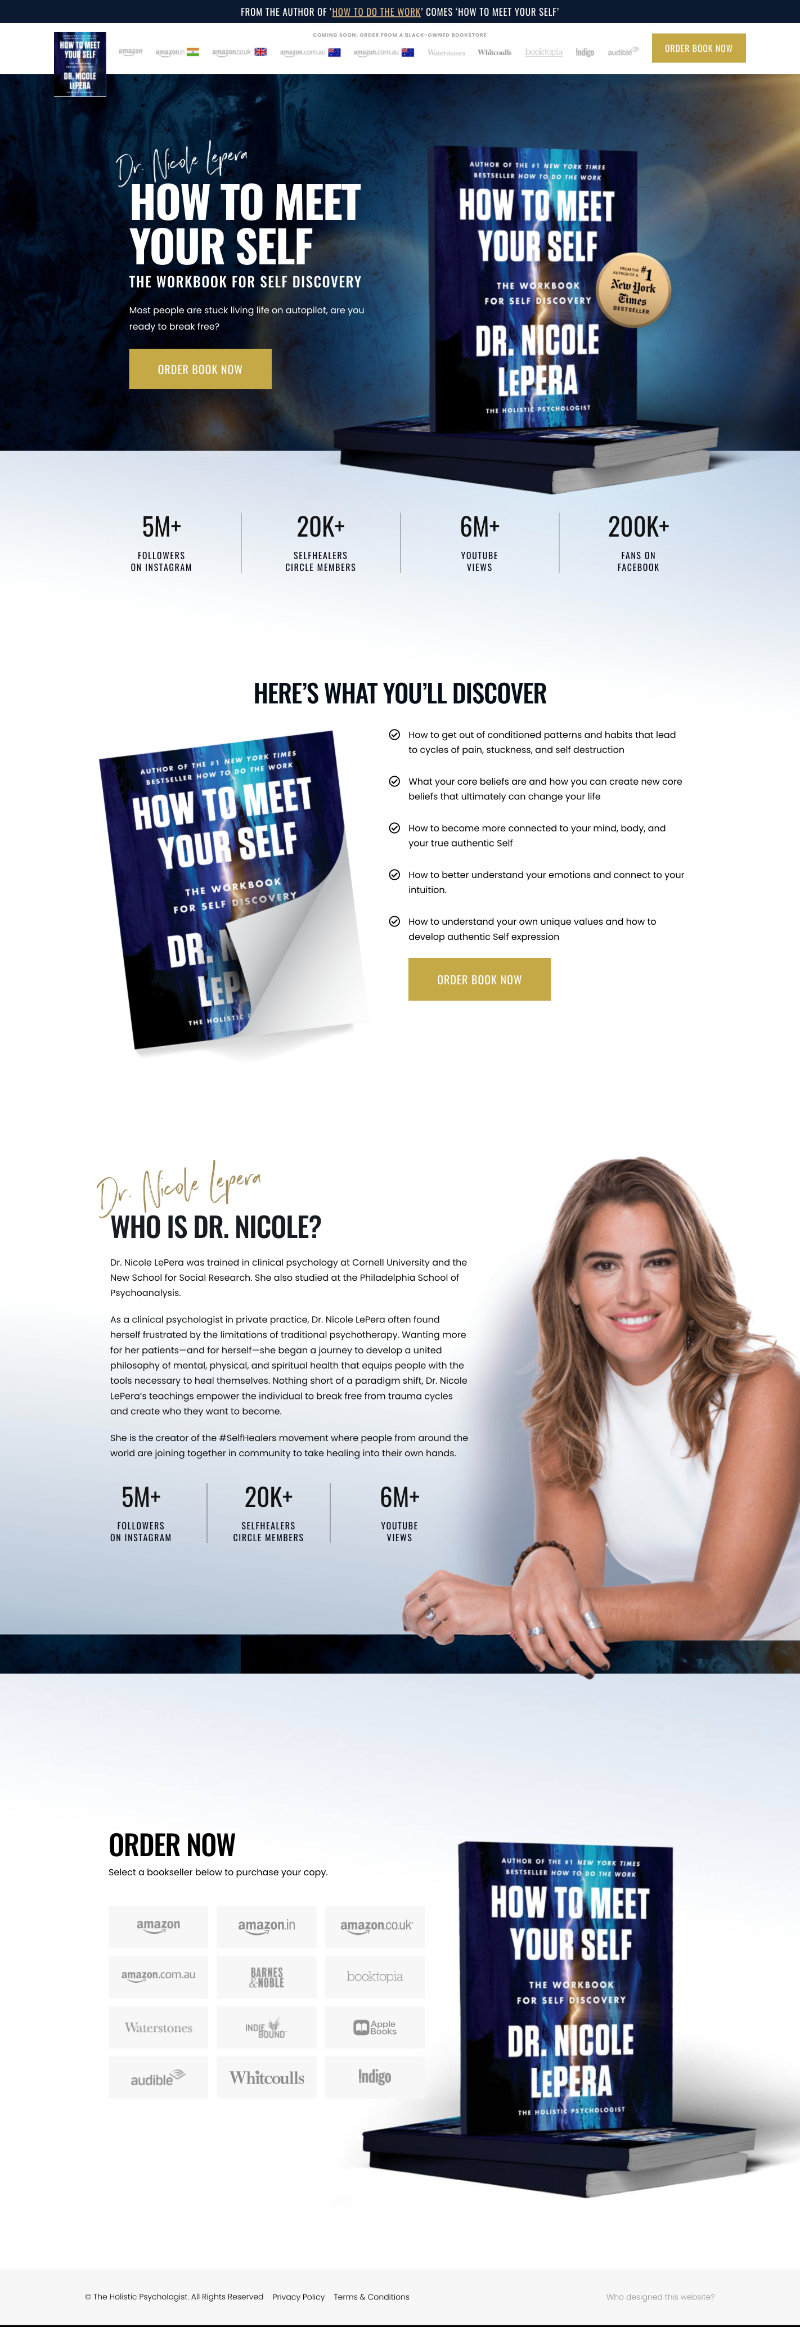 The Holistic Psychologist book landing page